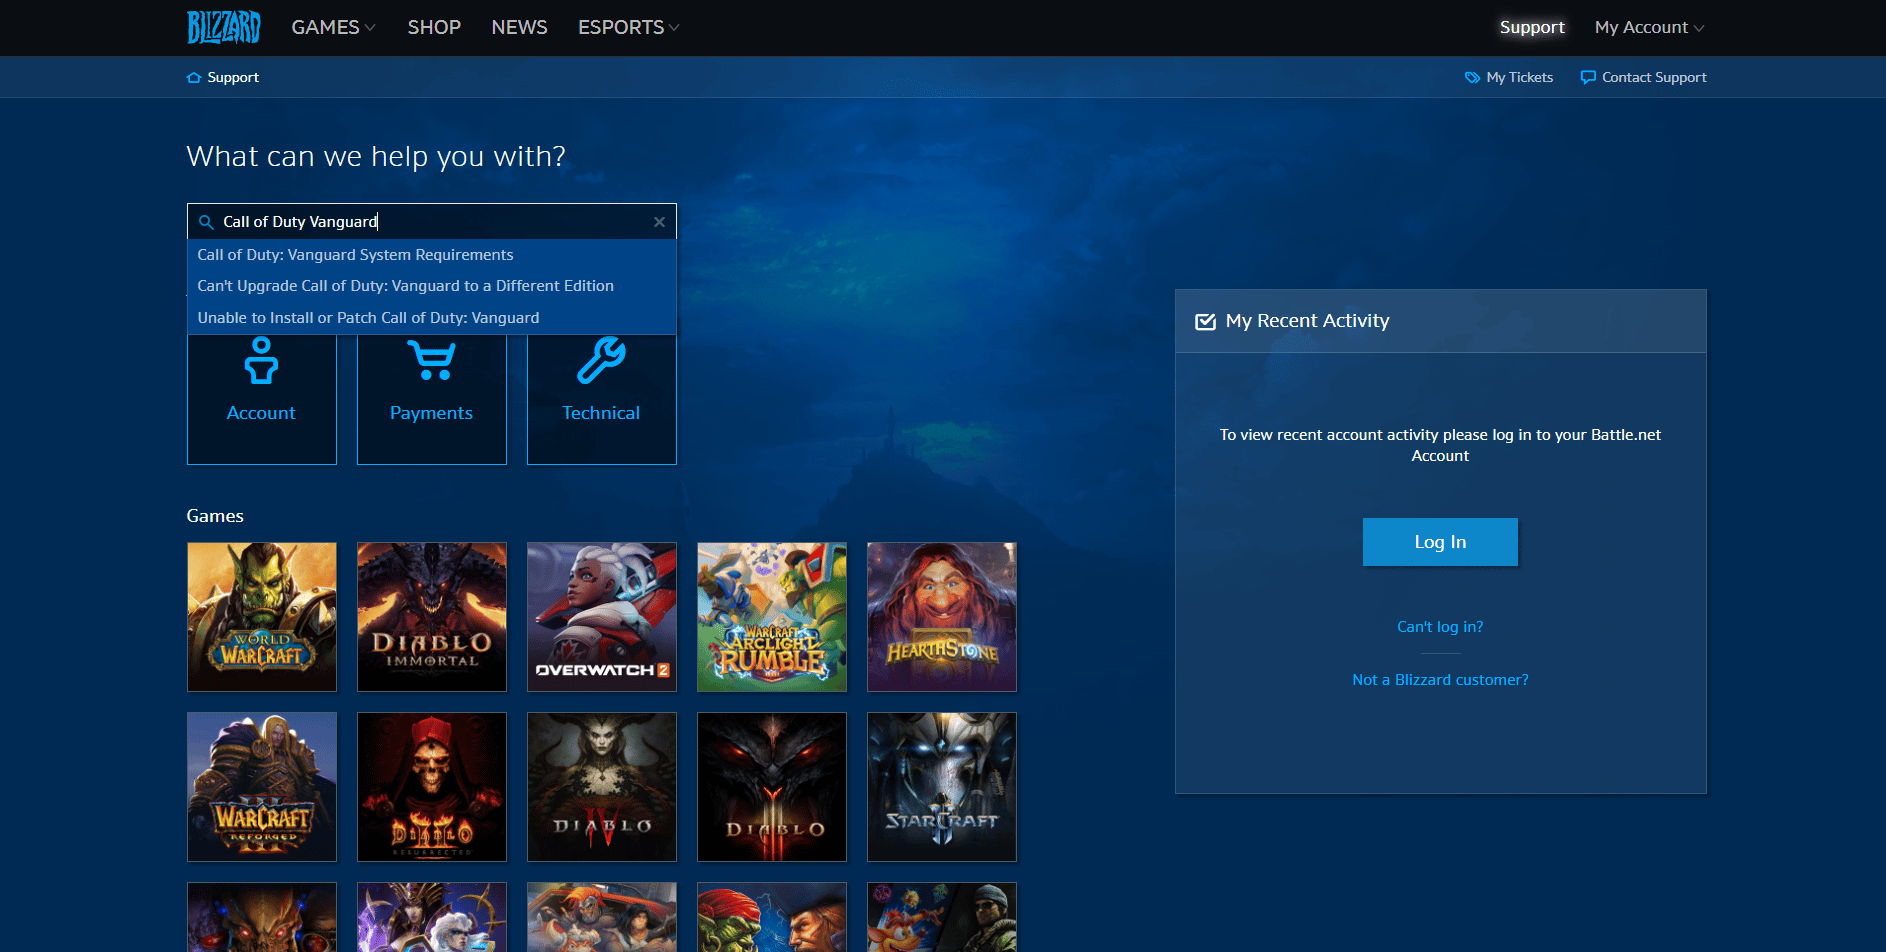 Blizzard Support page